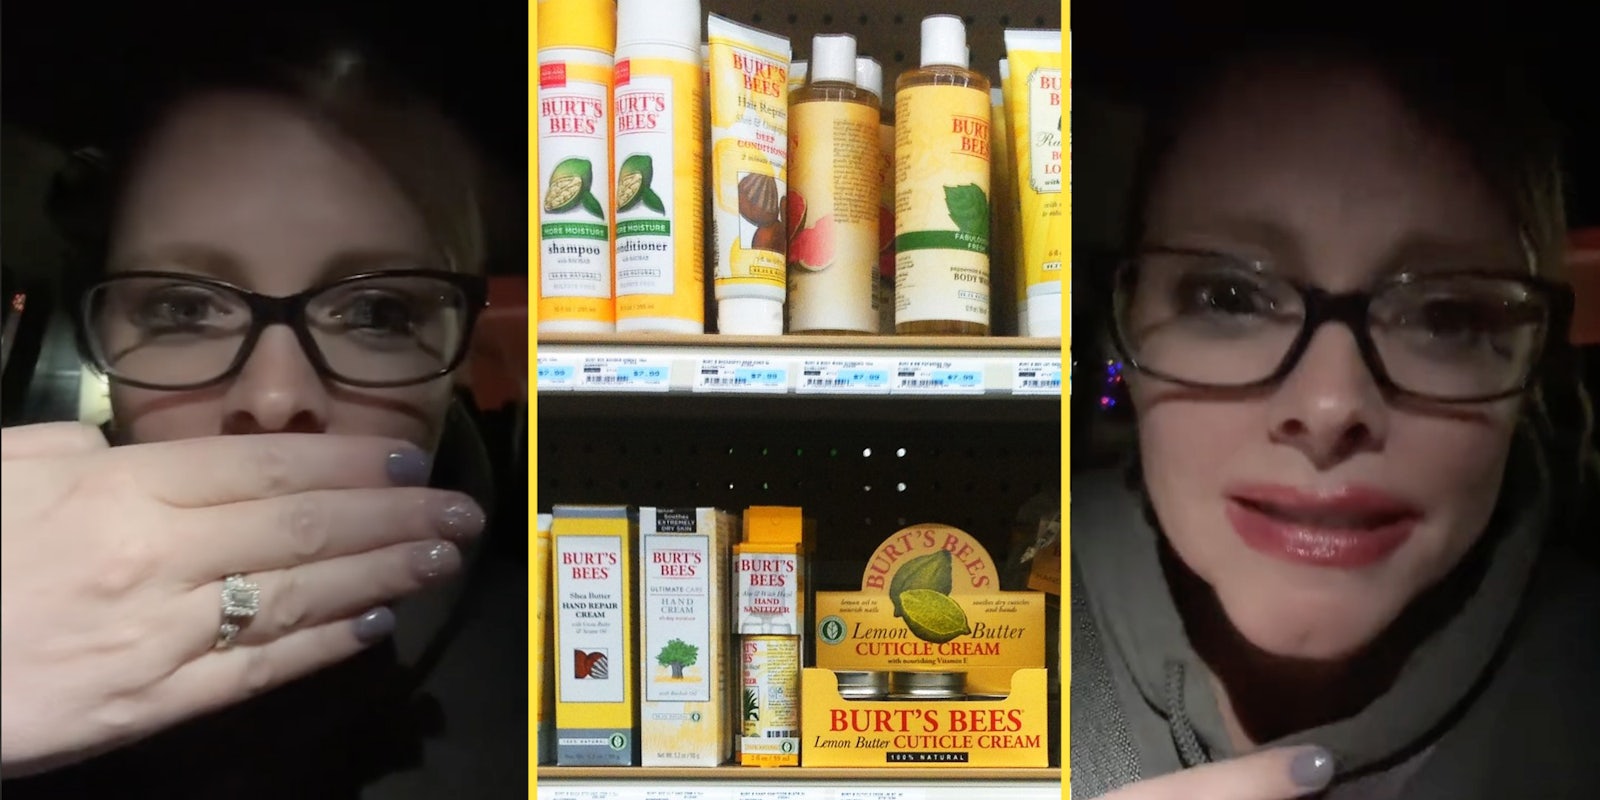 Woman covering her mouth(l), Burt's Bees products(c), Woman smiling(r)